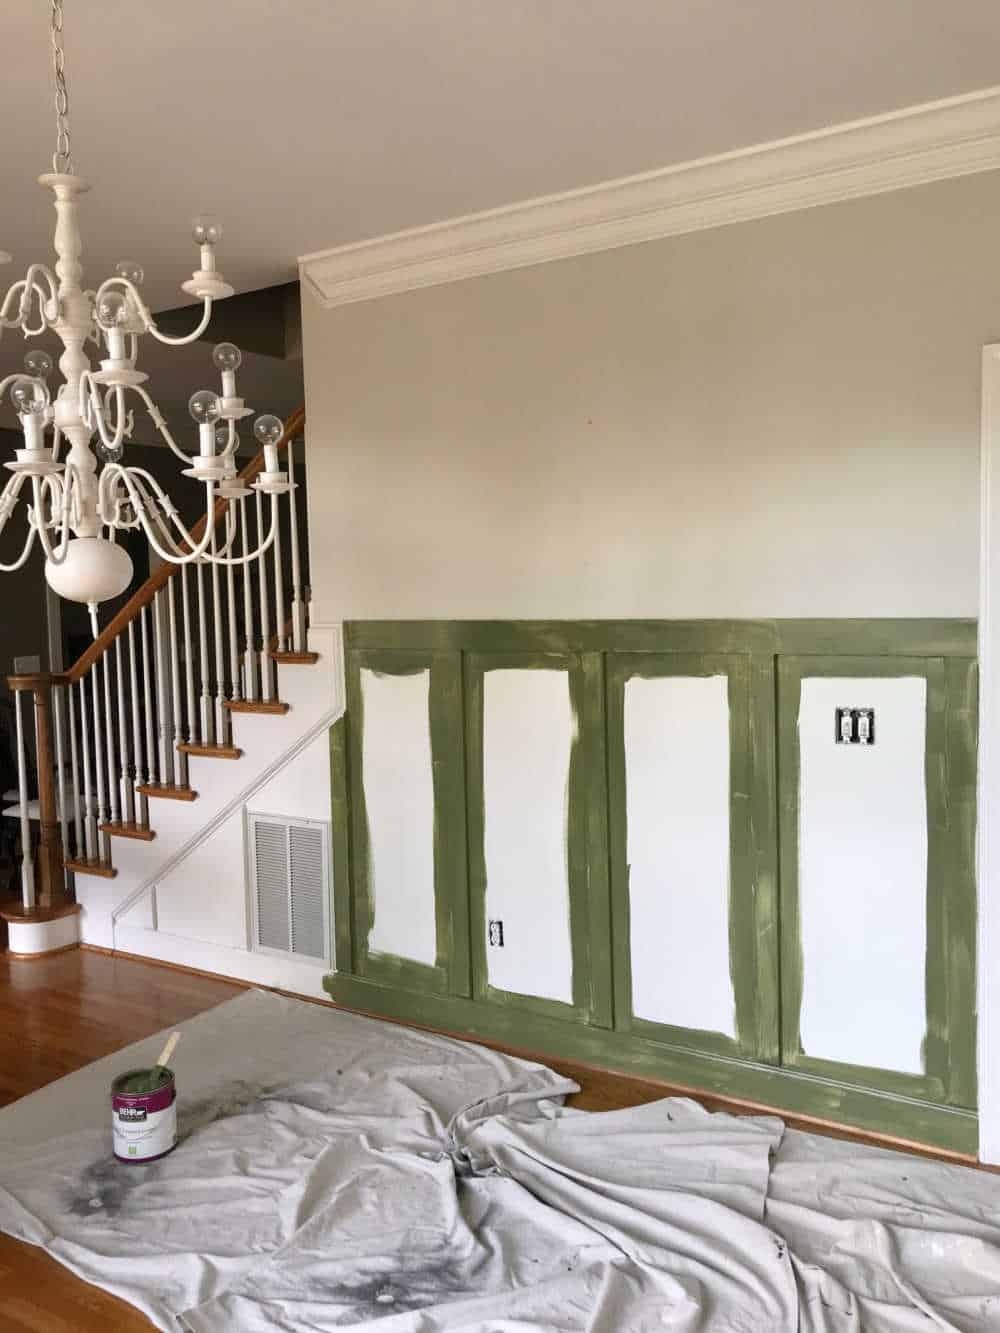 Oakmoss paint during makeover to see undertone